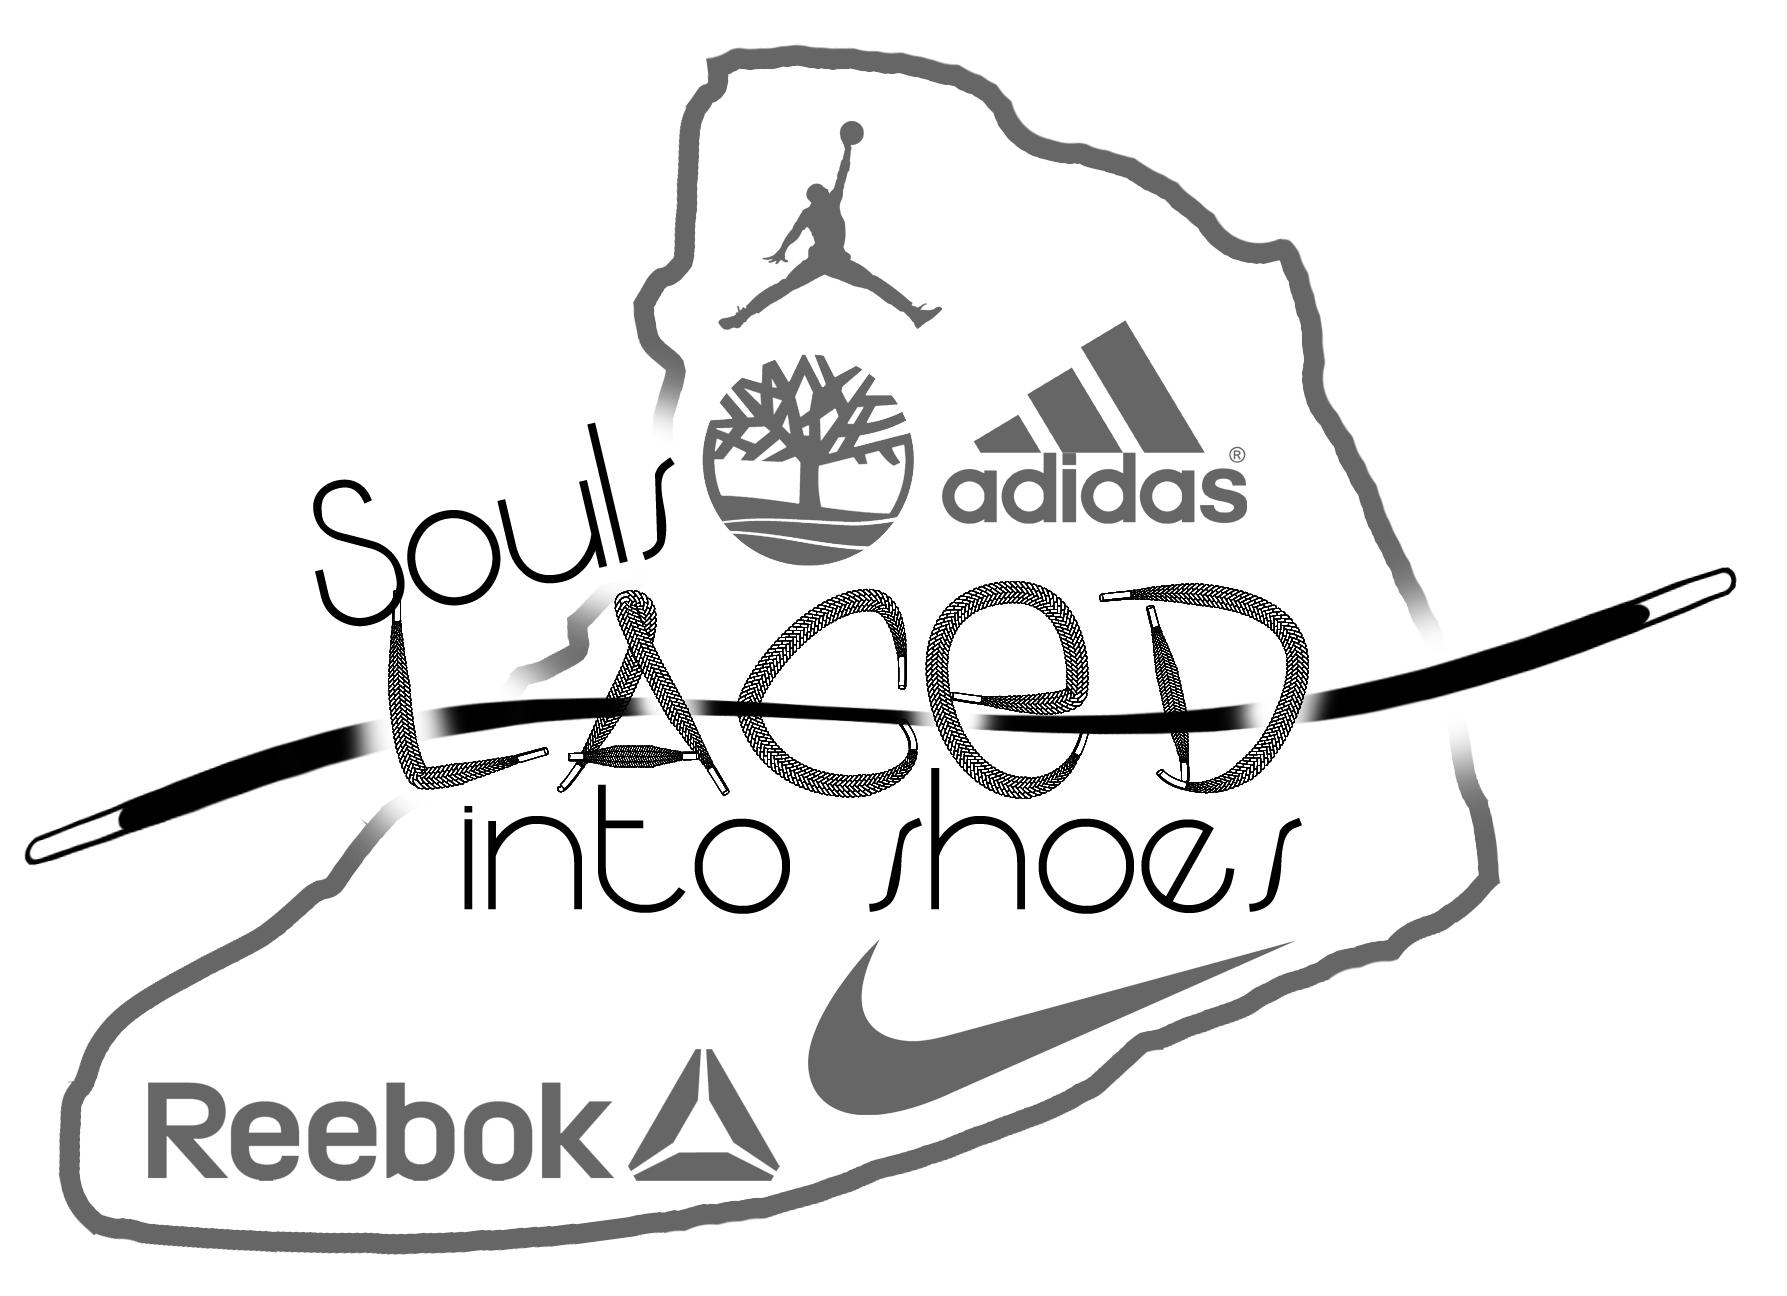 Stagg Online | Souls laced into shoes